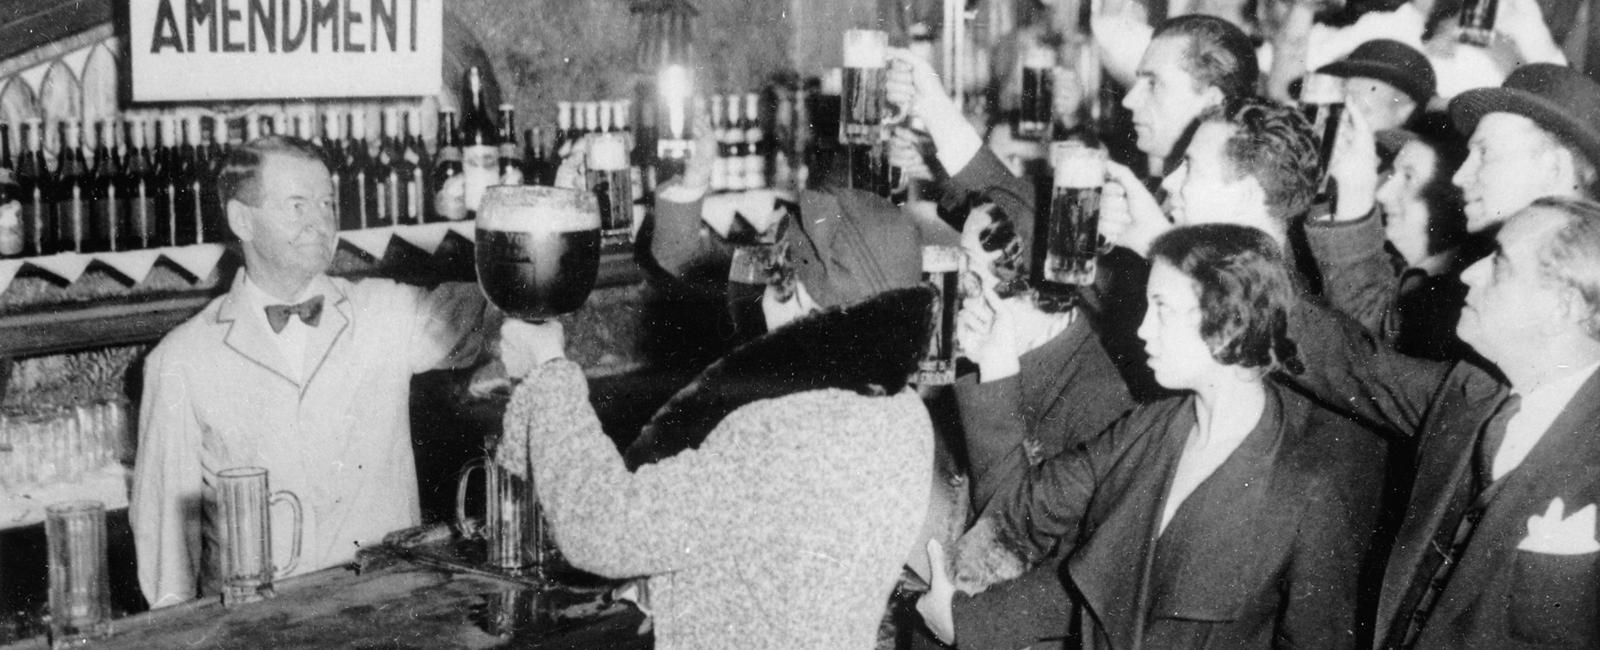 During prohibition in the united states the u s government poisoned alcohol